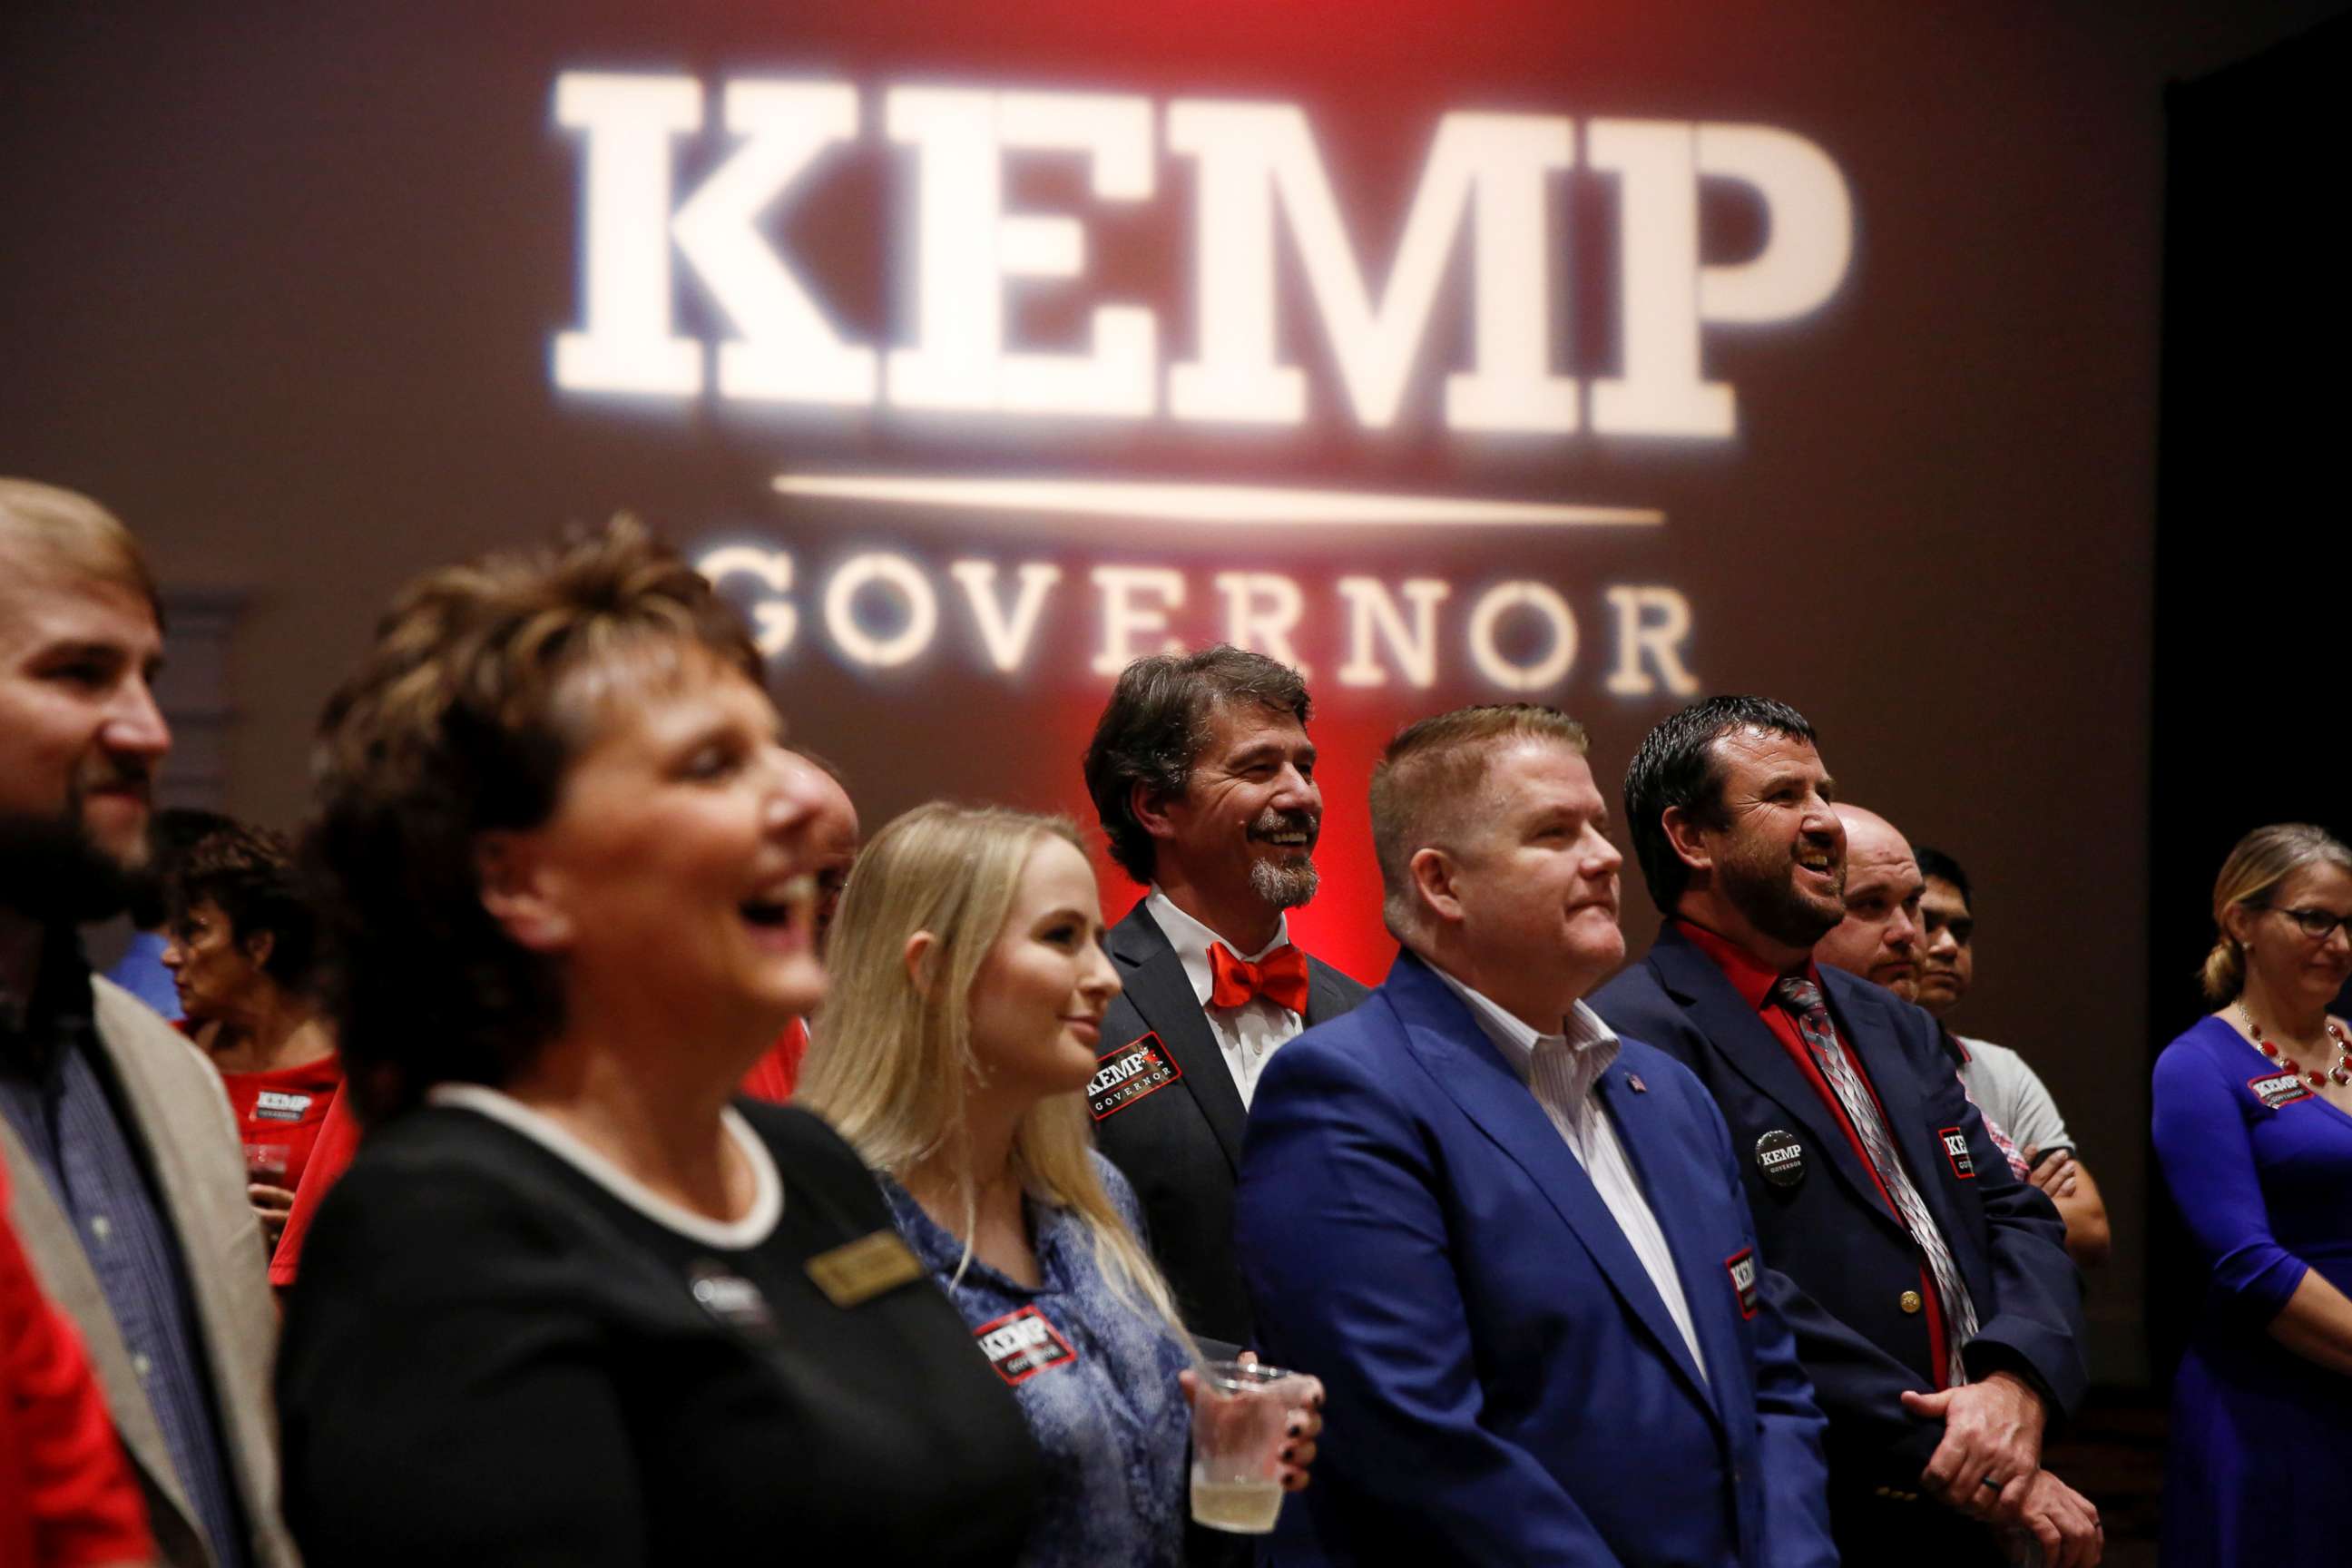 PHOTO: Brian Kemp supporters listen to a speaker as they wait for poll numbers to come in at Republican gubernatorial candidate Brian Kemp's election night party in Athens, Ga., Nov. 6, 2018.